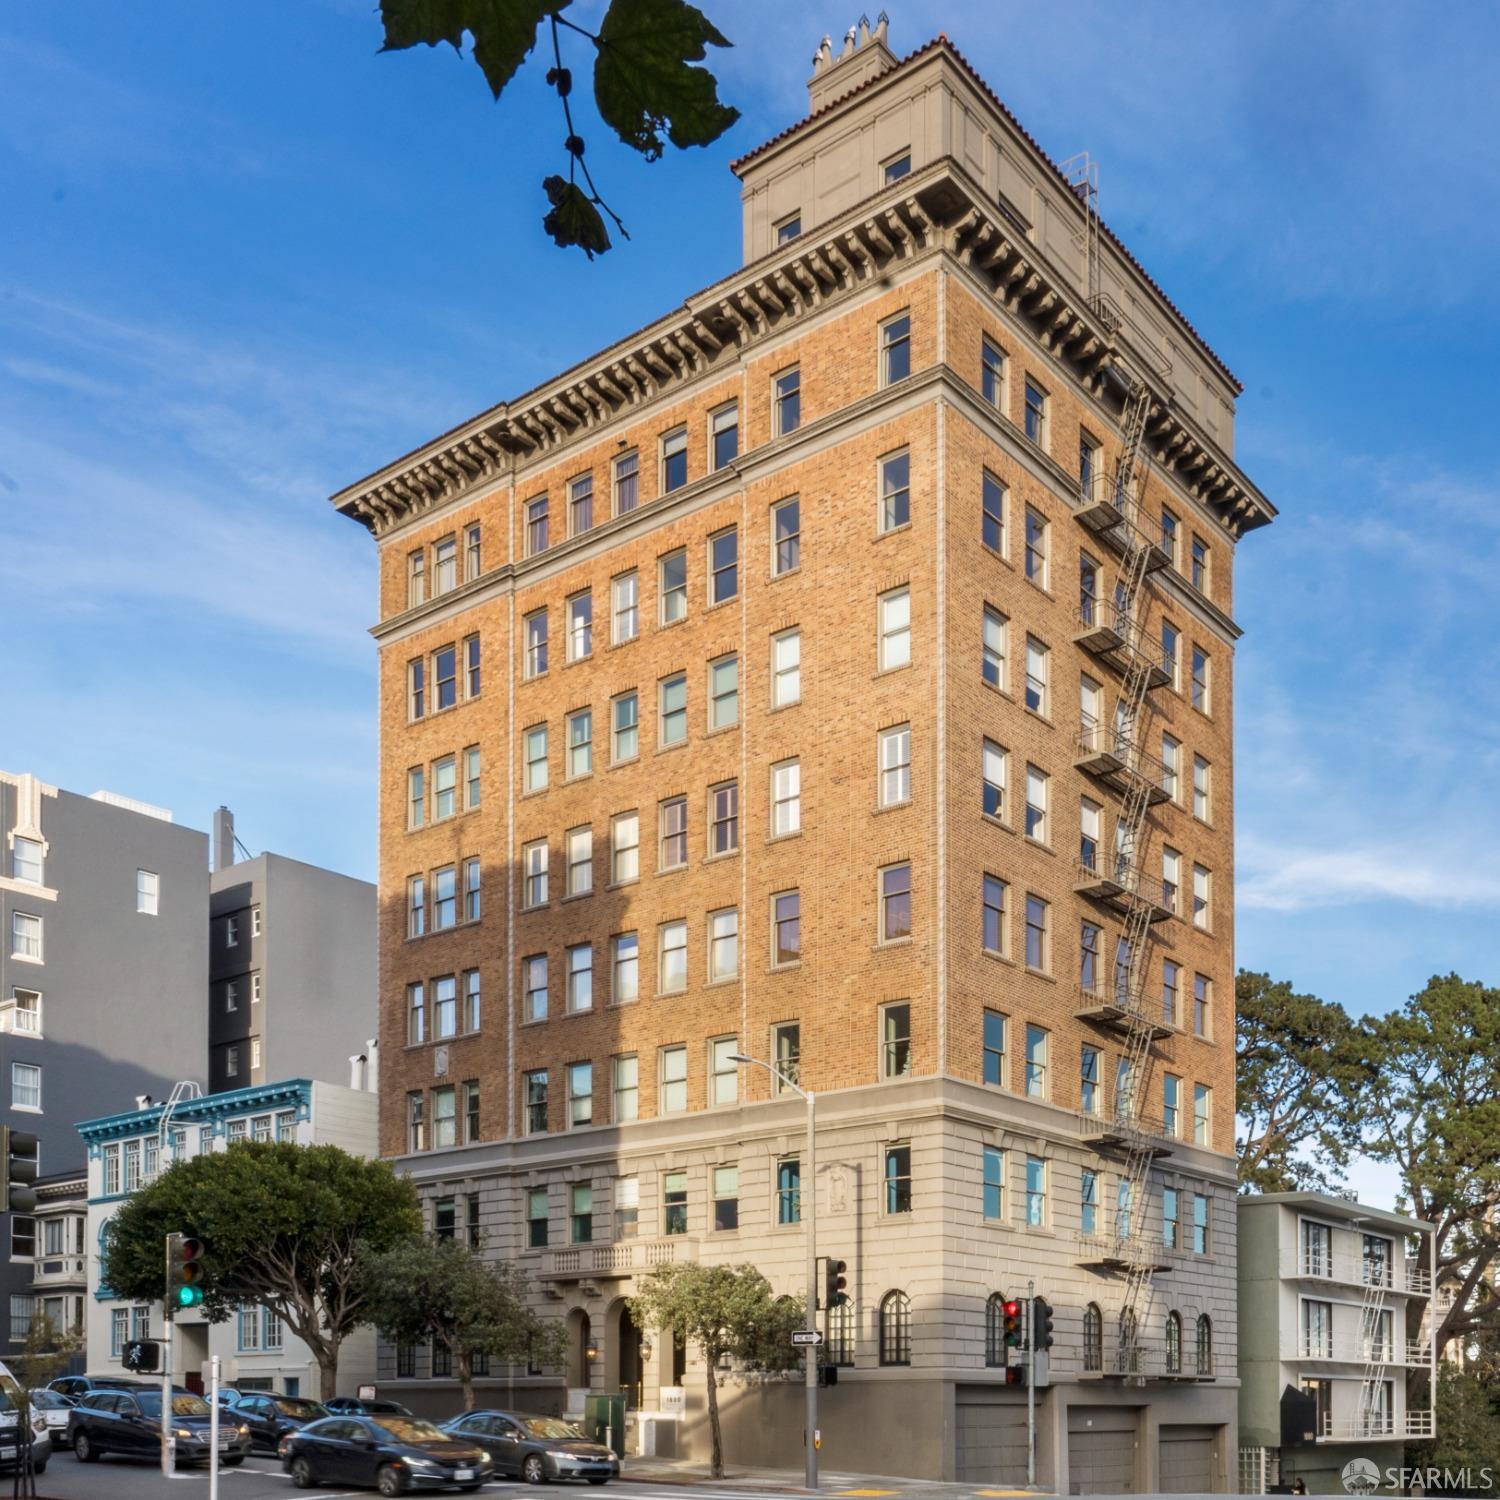 You might also be interested in PACIFIC HEIGHTS